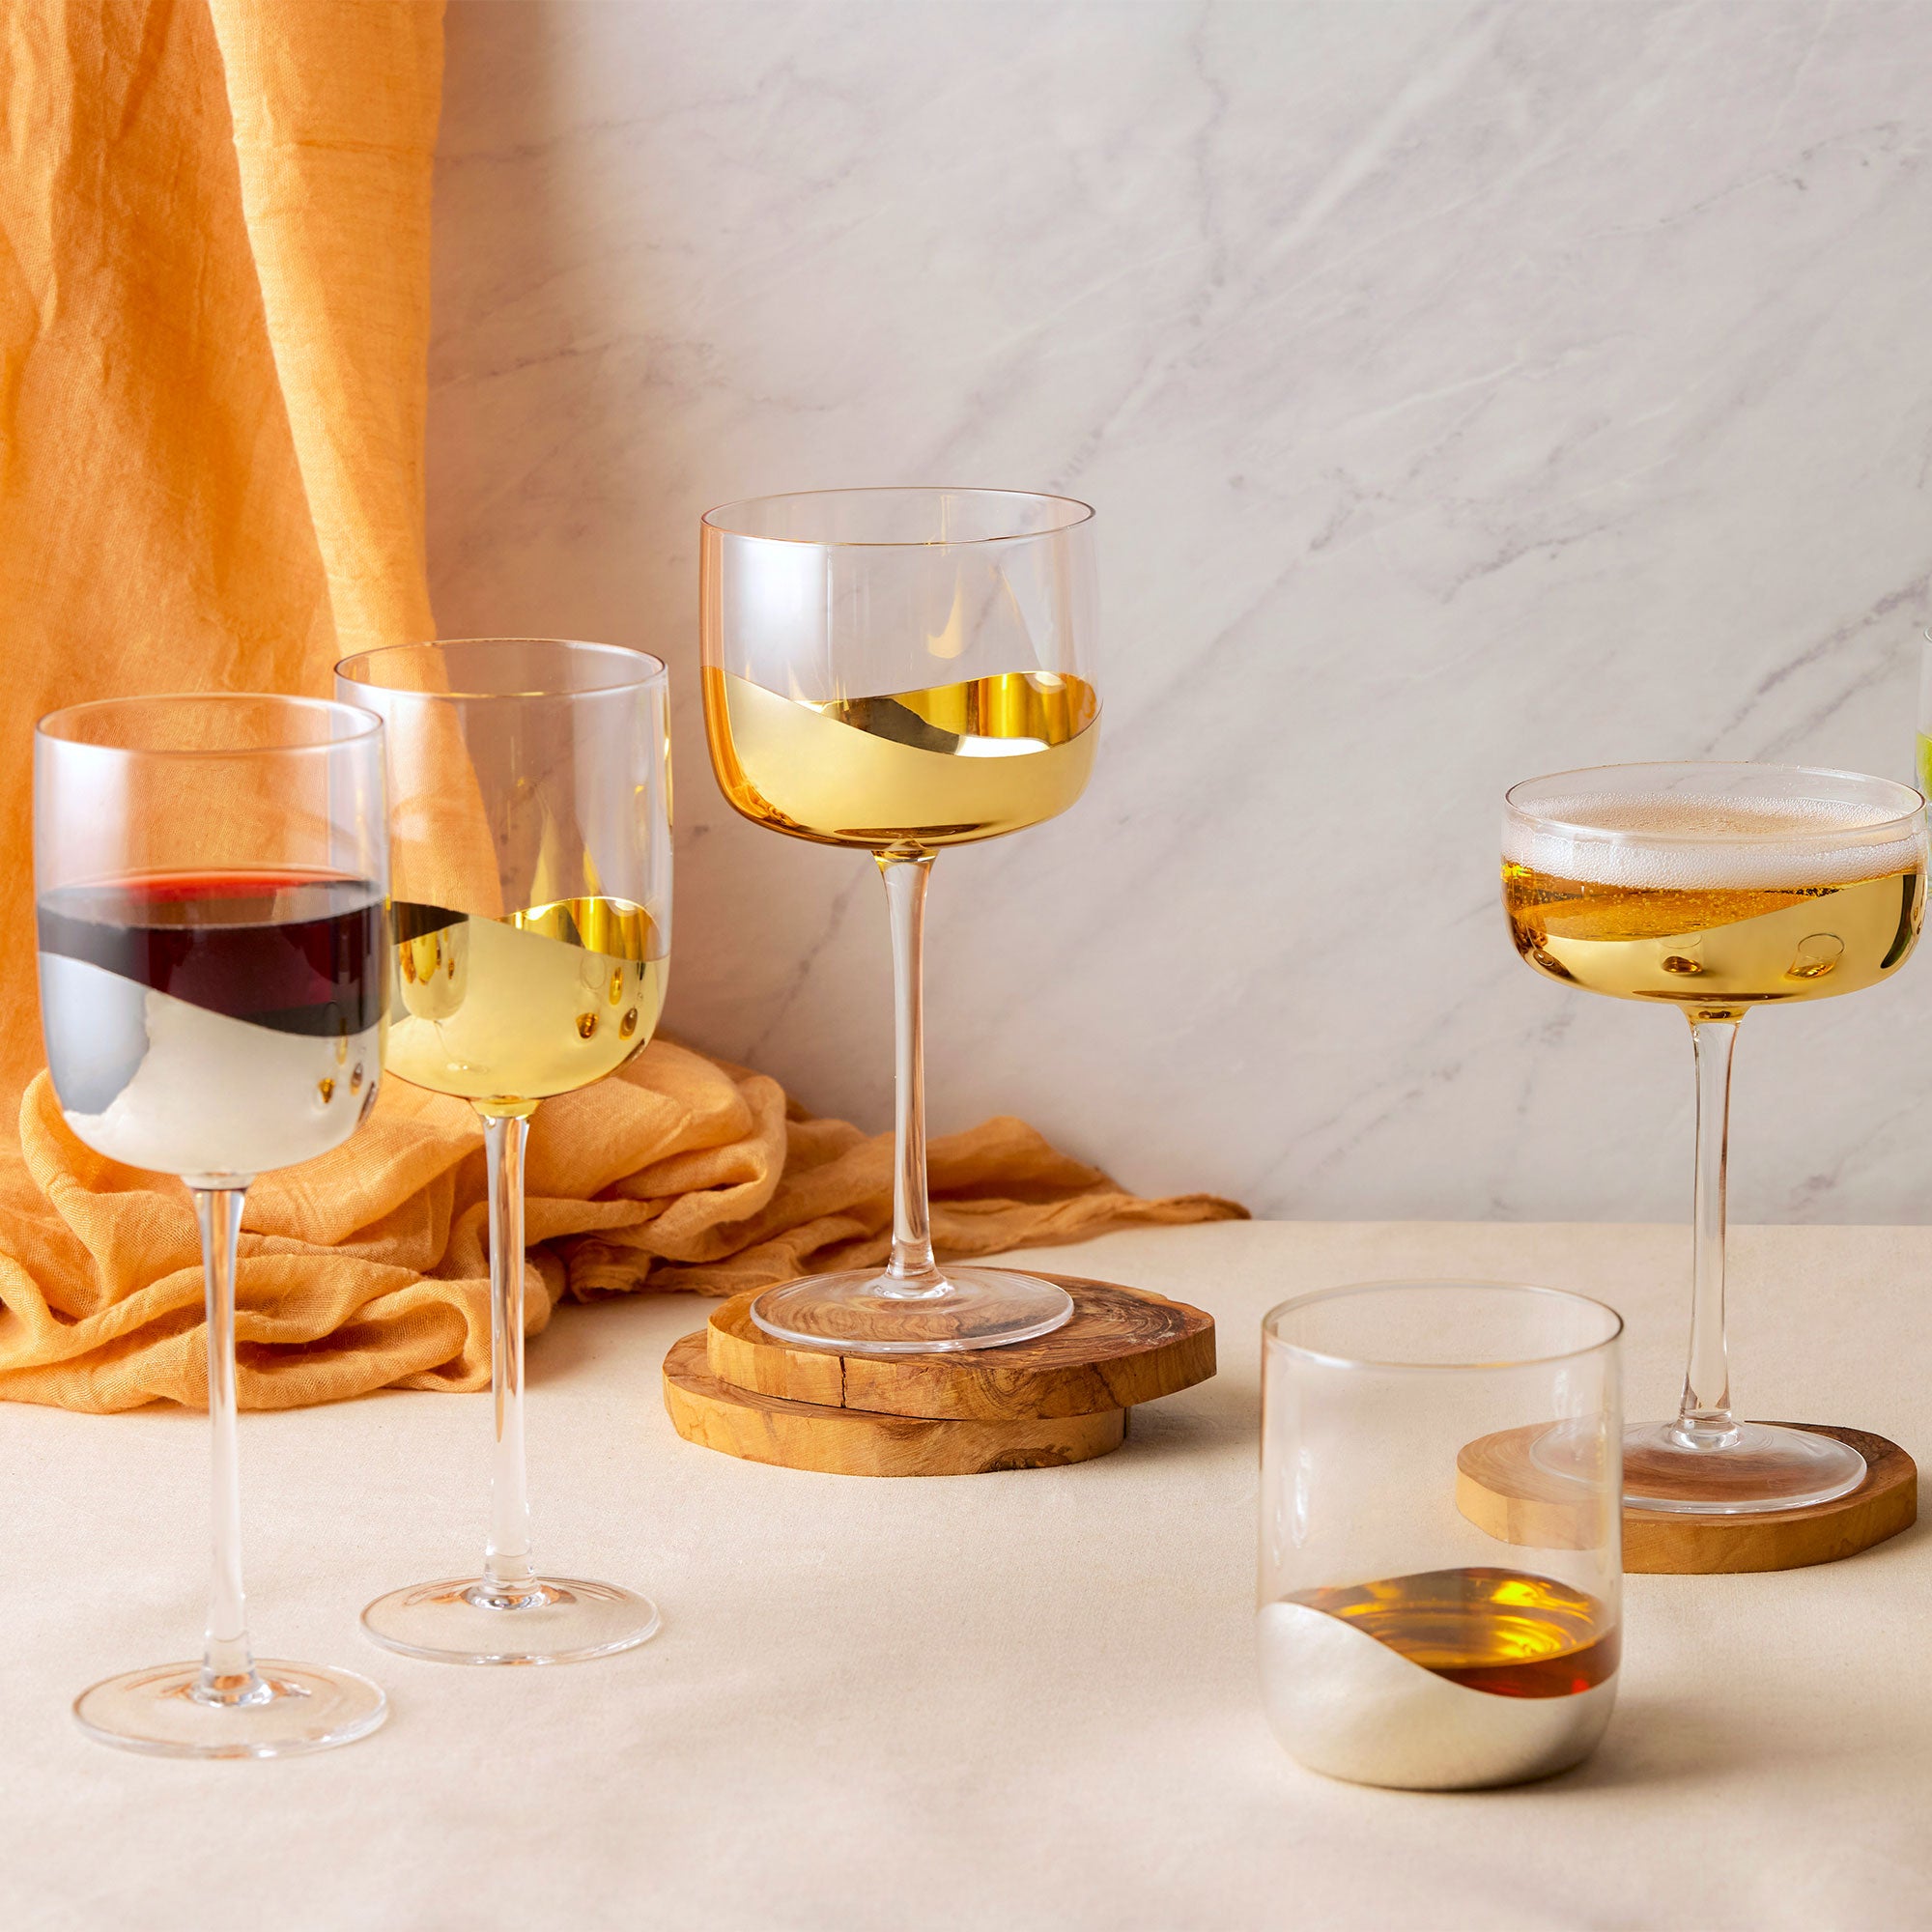 Wave - Gold Gin Glasses